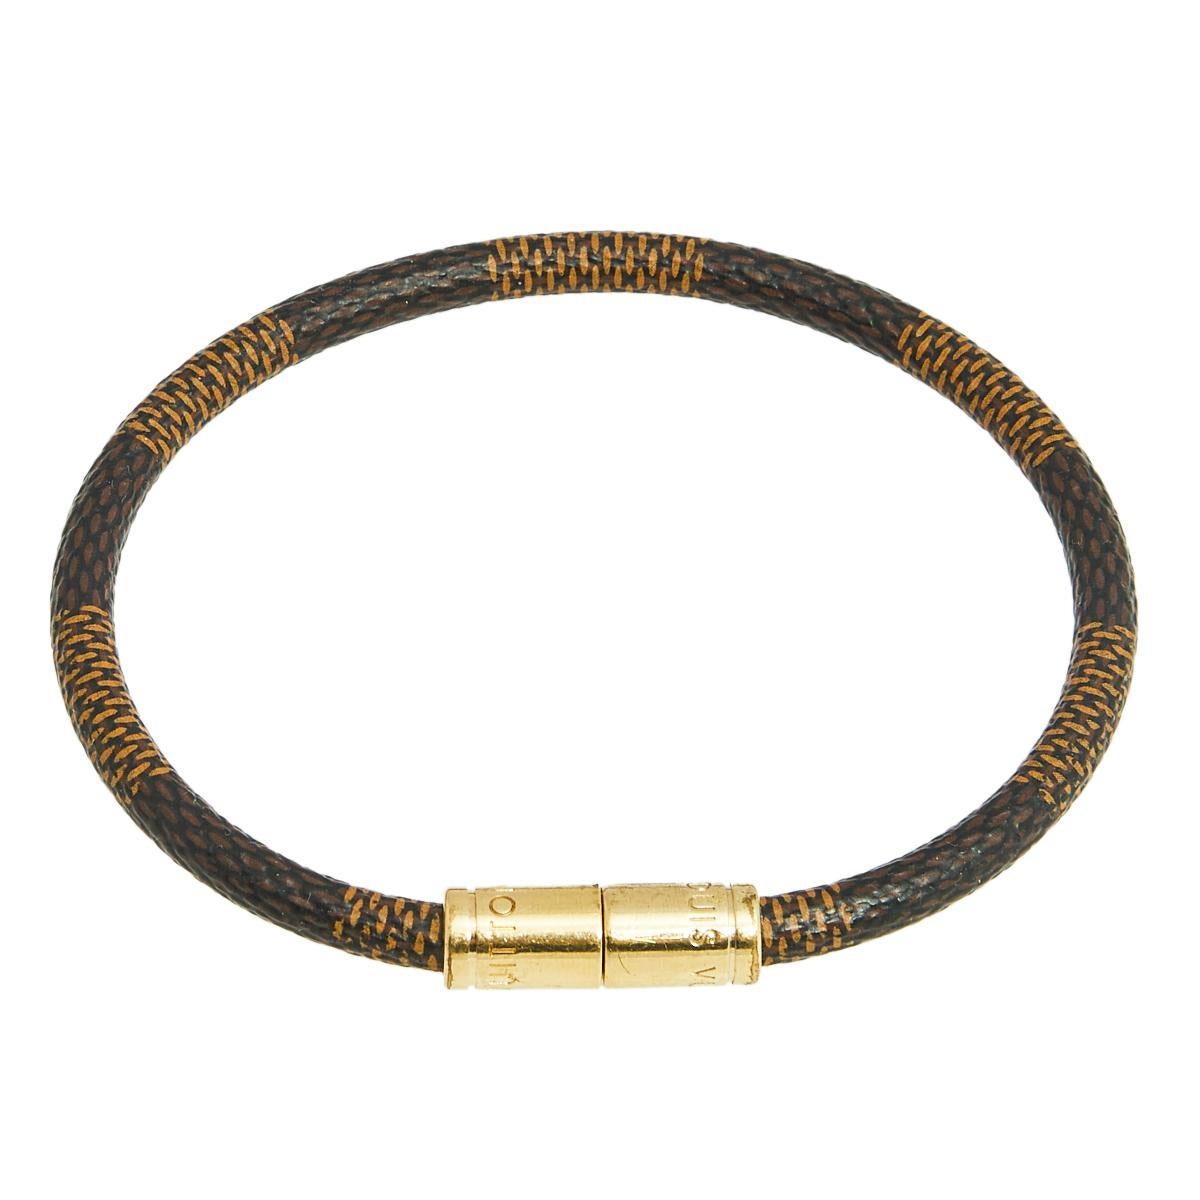 Simple yet elegant, this 'Keep It' bracelet is designed with the label's signature Damier Ebene canvas body and features a gold-tone center. Wear it as a stand-alone piece or stack it with similar bands for a more edgy feel.

